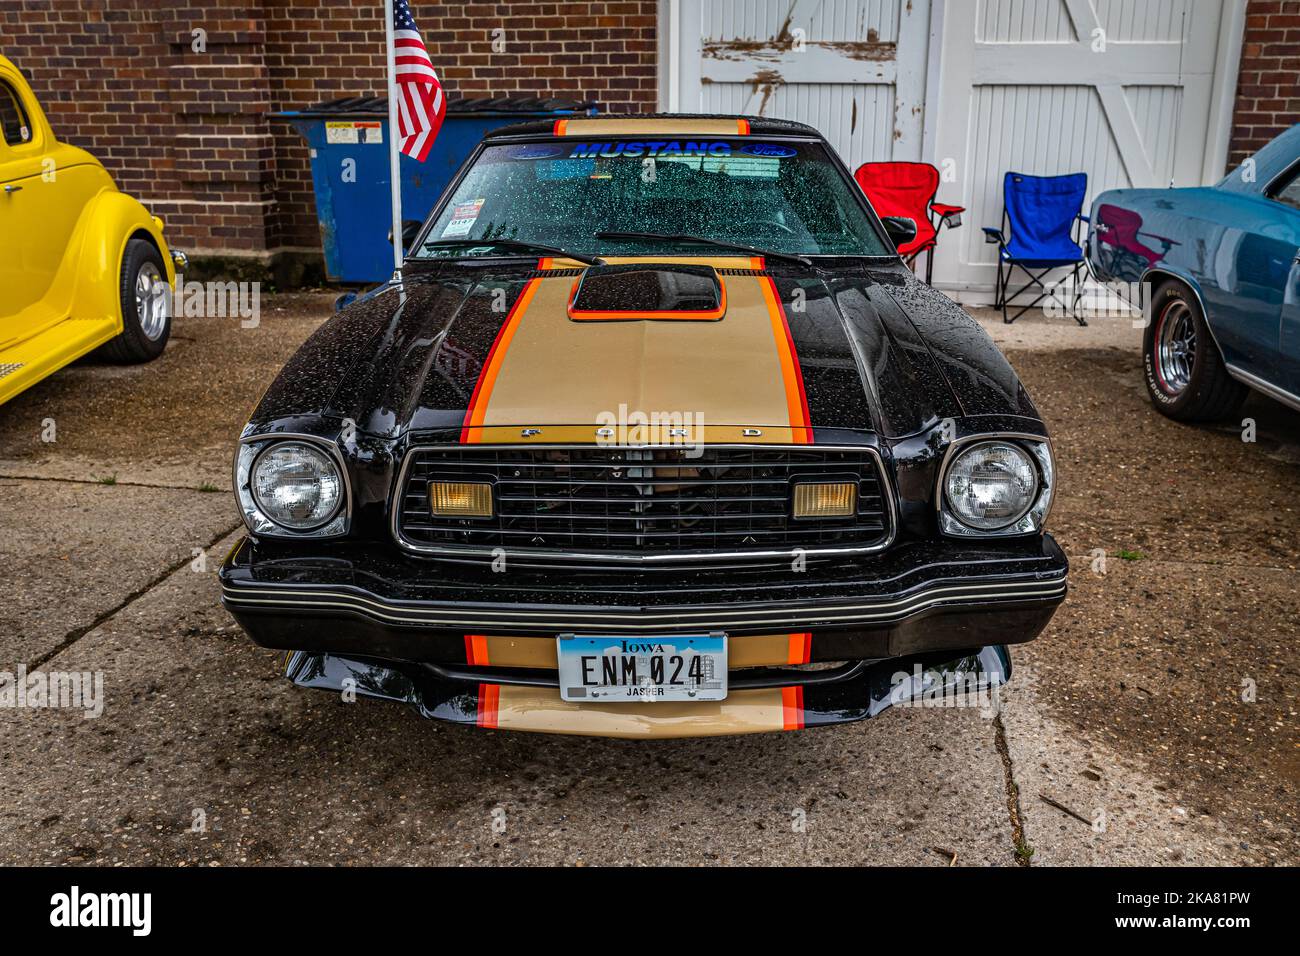 Des Moines, IA - July 01, 2022: High perspective front view of a 1978 Ford Mustang Cobra II at a local car show. Stock Photo